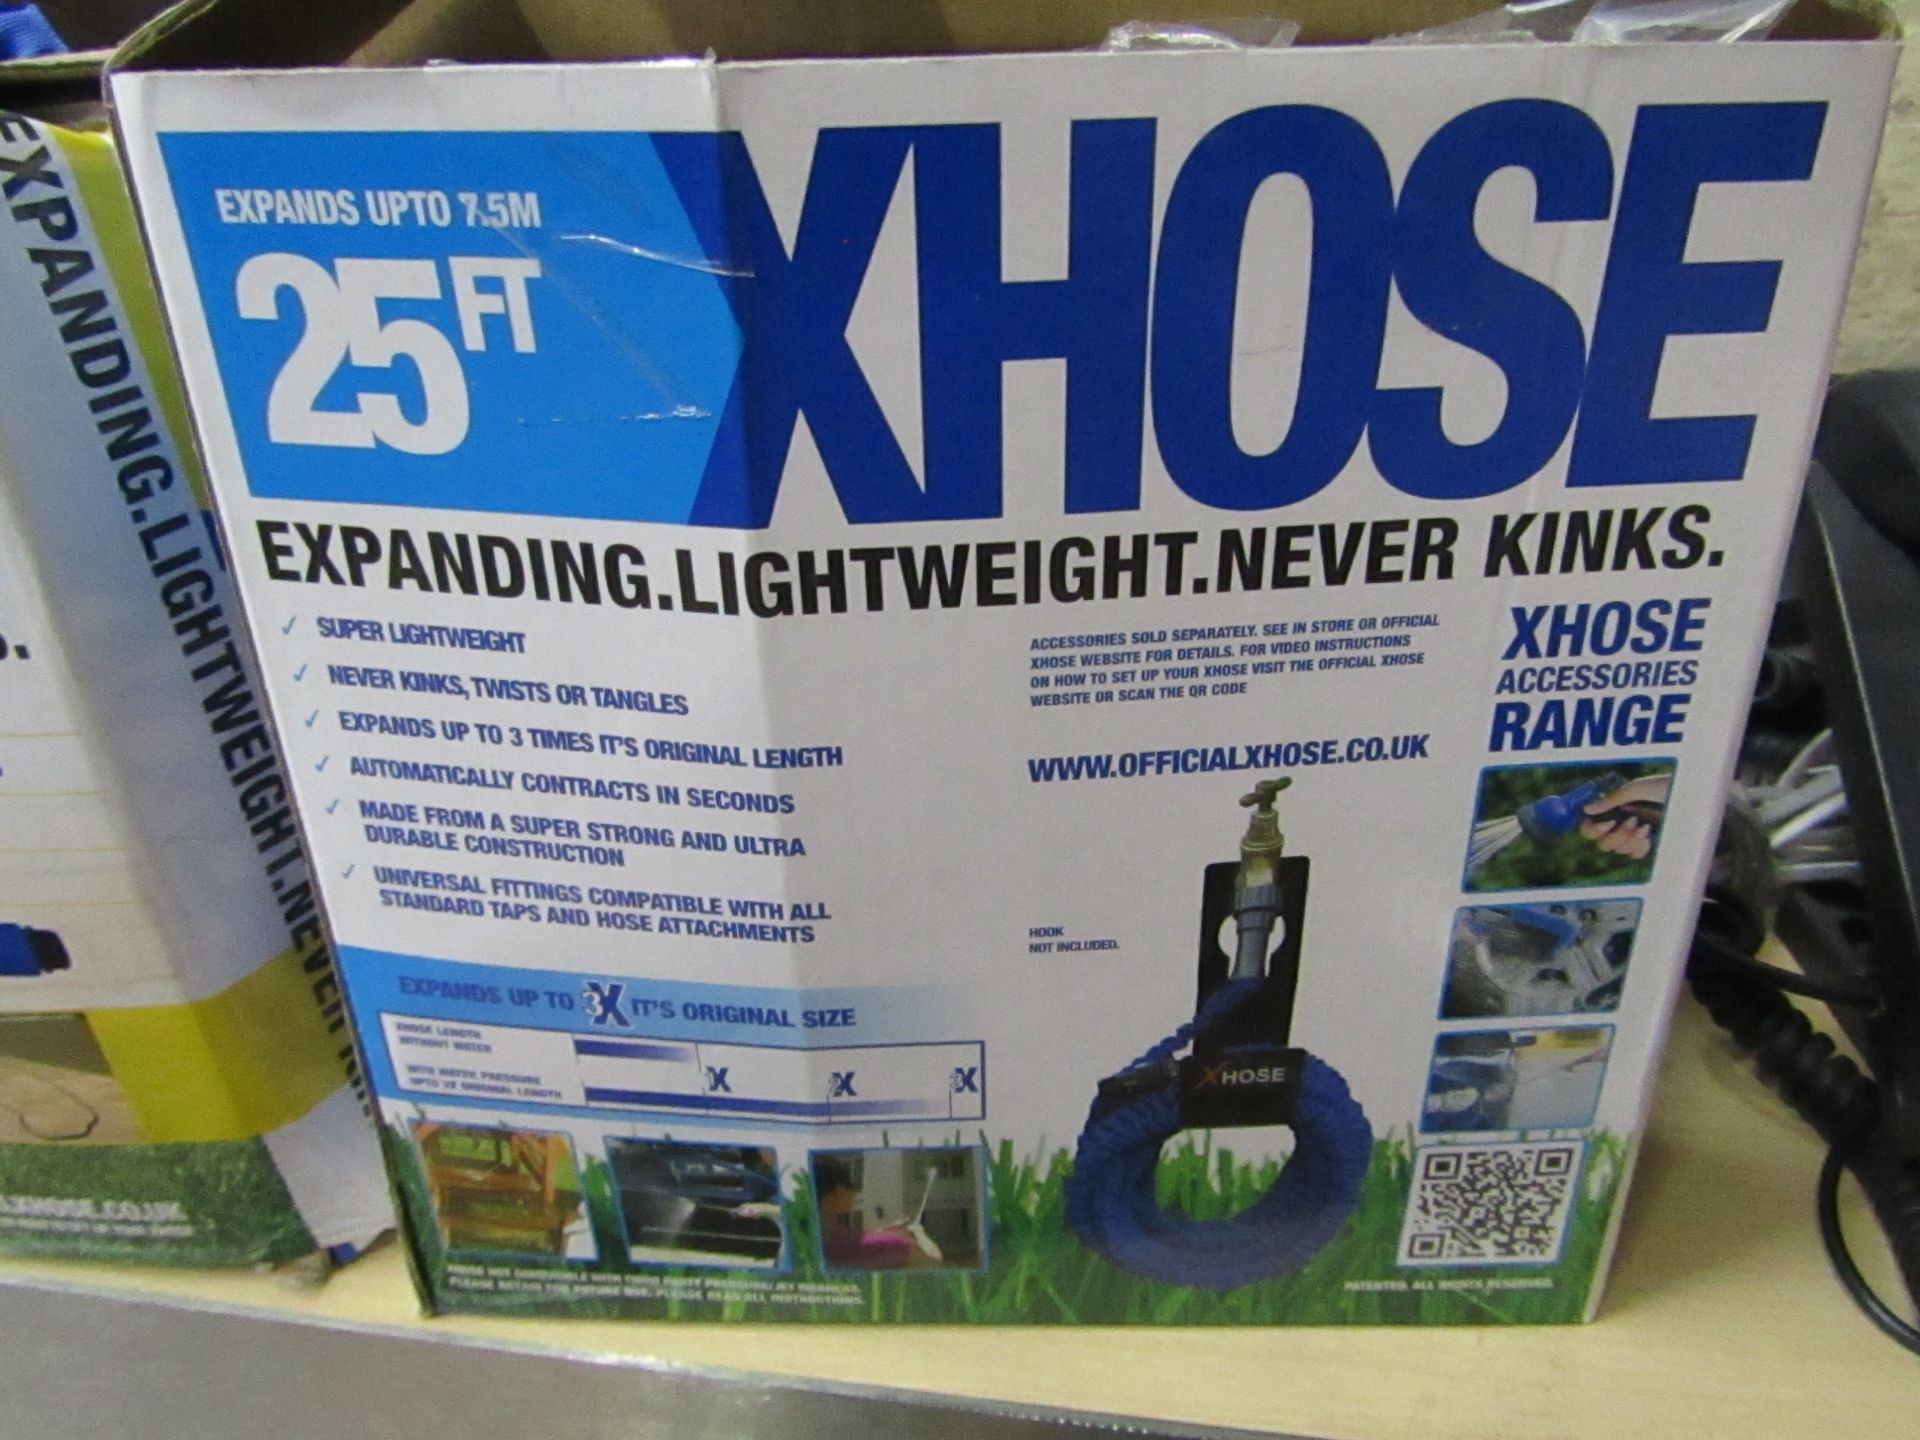 25ft Xhose Expanding Hose.Boxed but unchecked.PLEASE NOTE THIS ITEM CANNOT BE RE-SOLD ON AMAZON OR